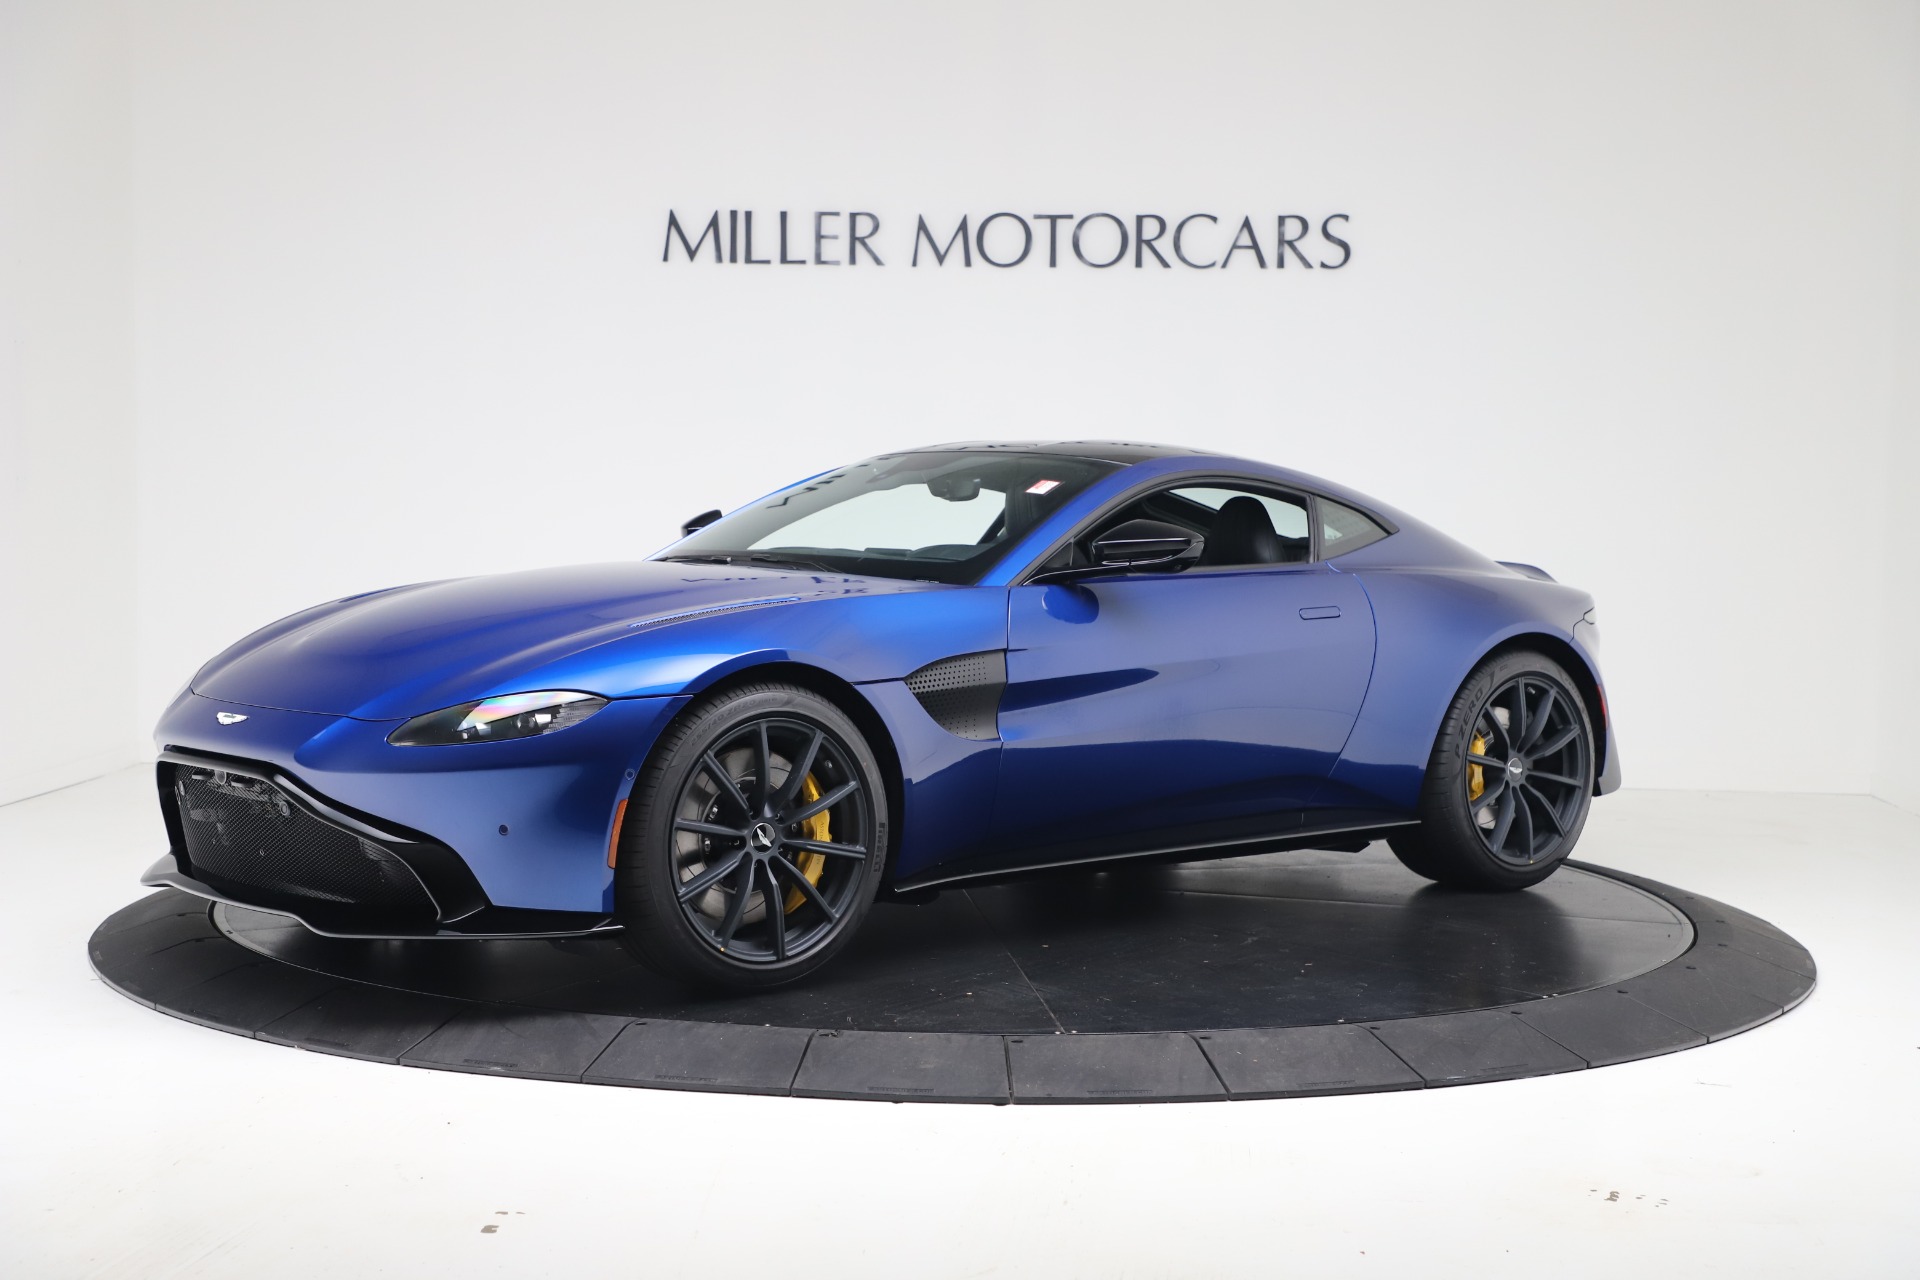 Used 2020 Aston Martin Vantage Coupe for sale Sold at Bugatti of Greenwich in Greenwich CT 06830 1